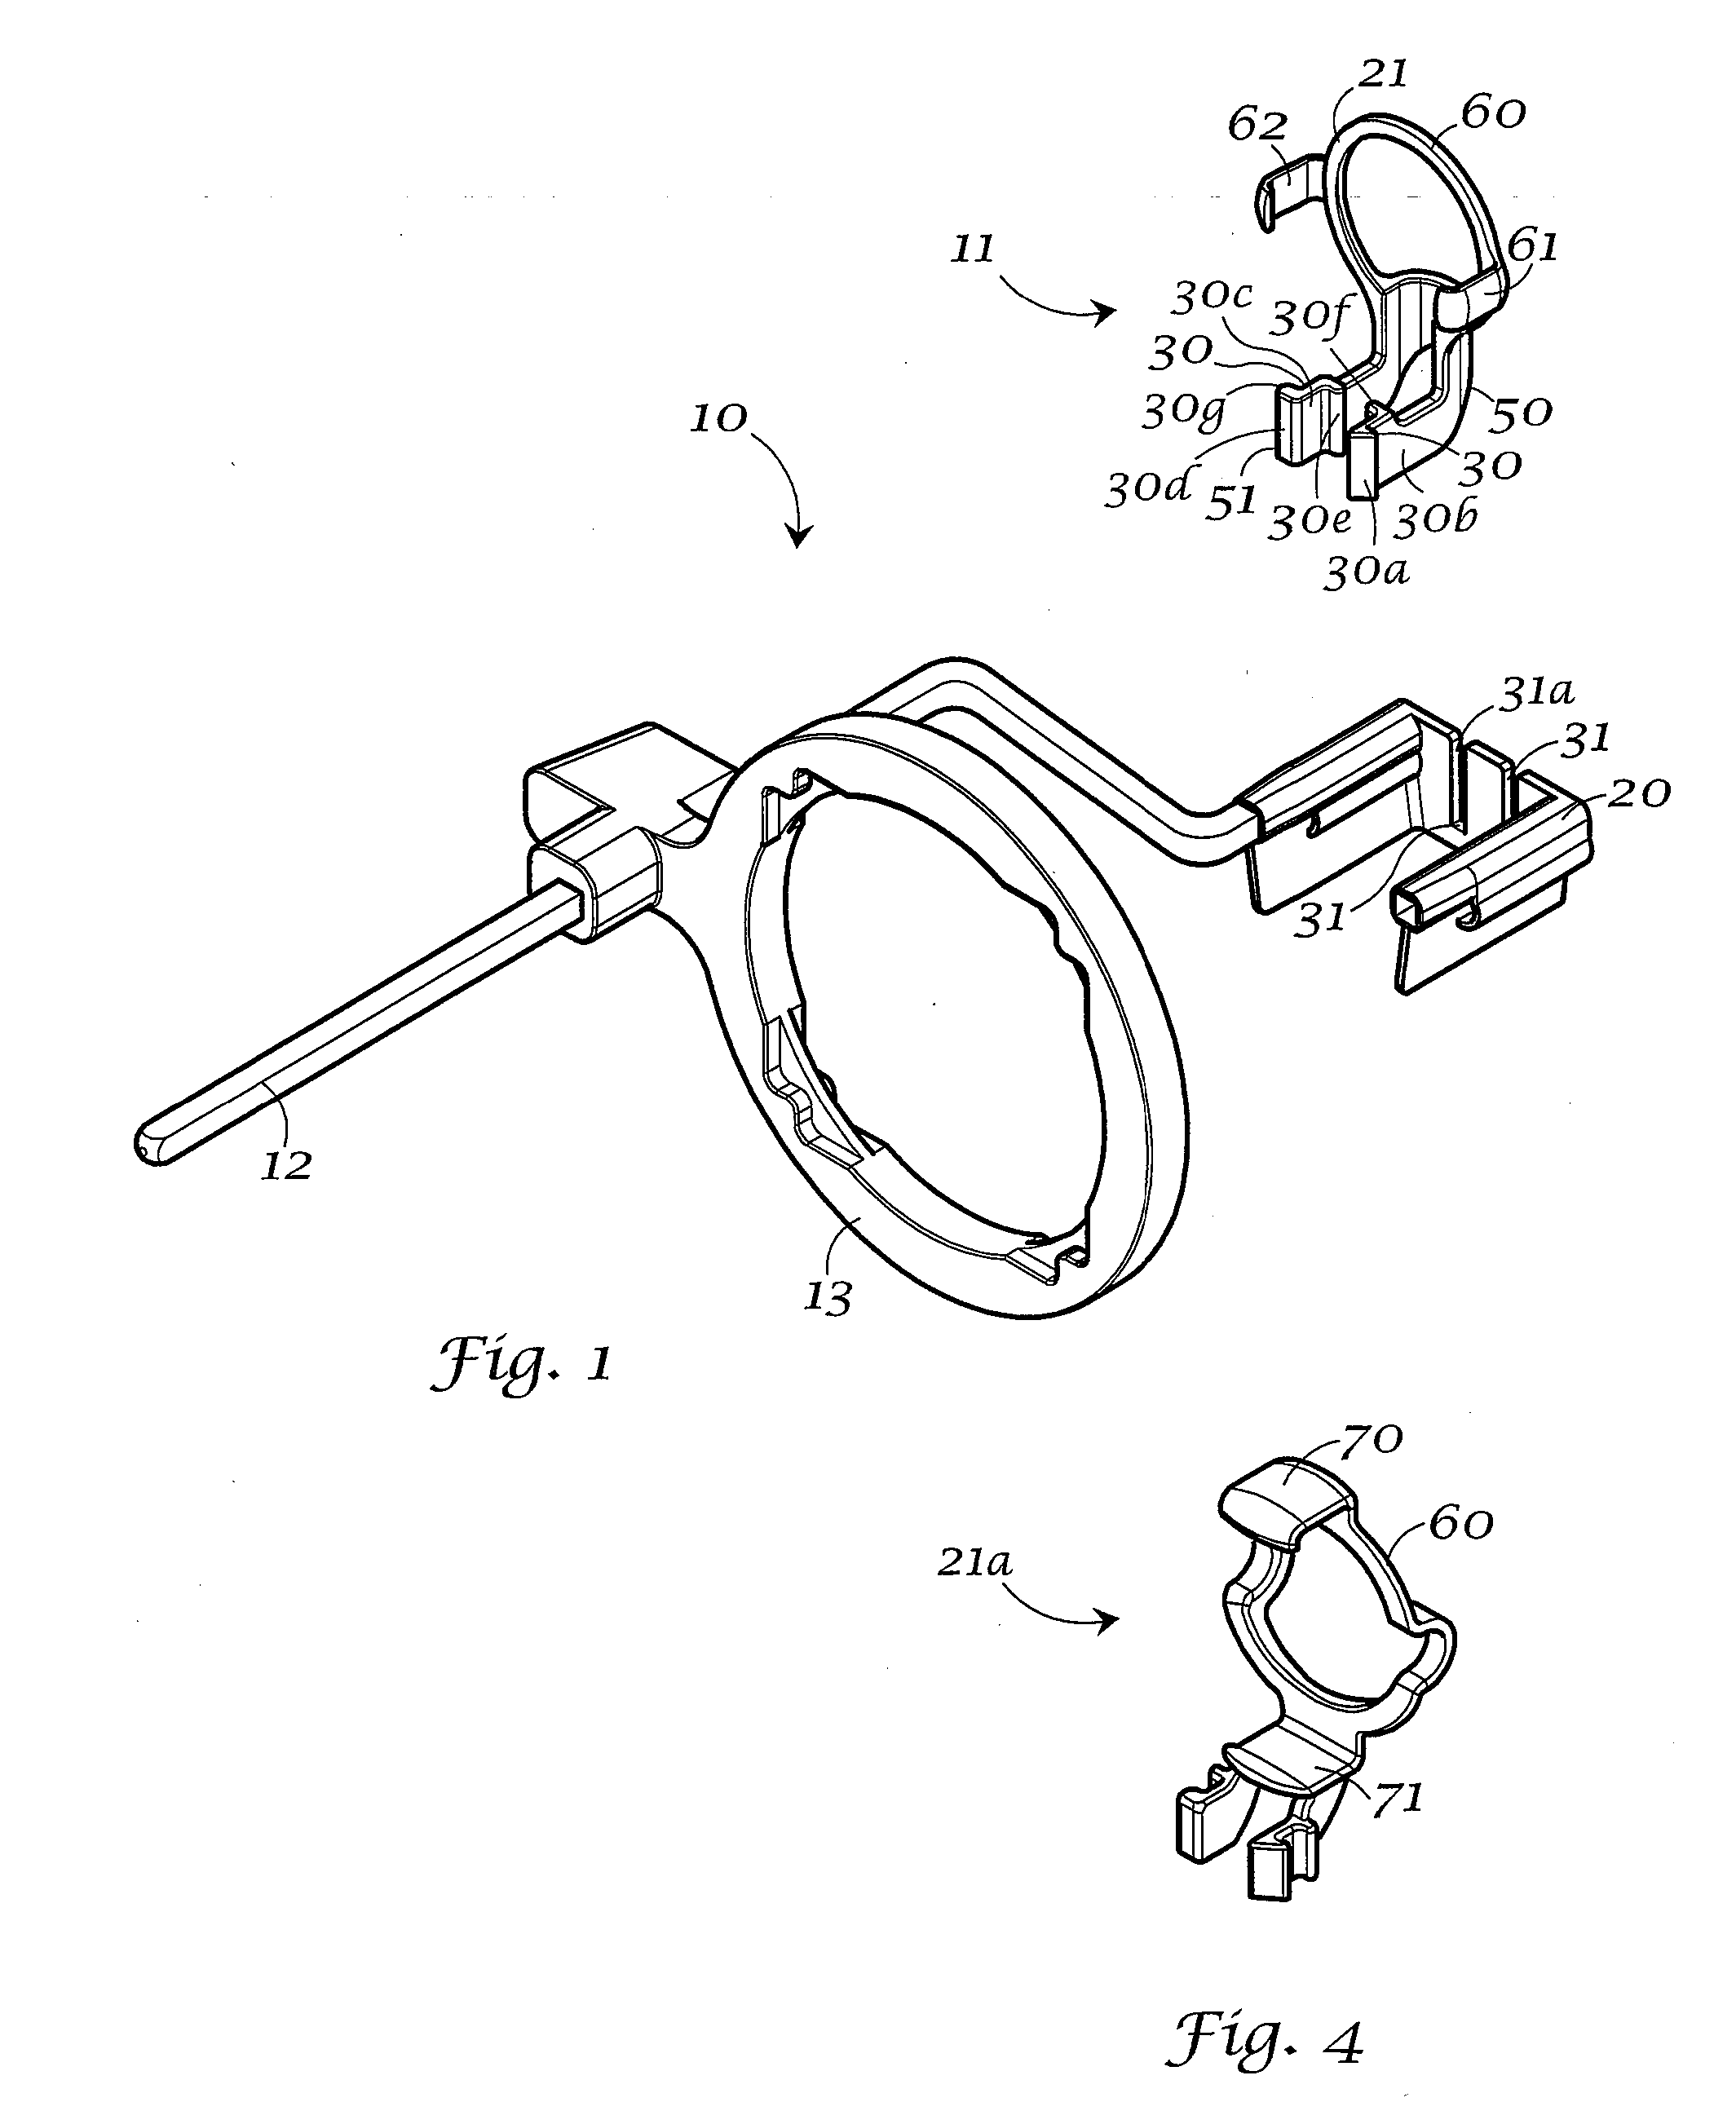 Positioning apparatus for dental x-ray procedures